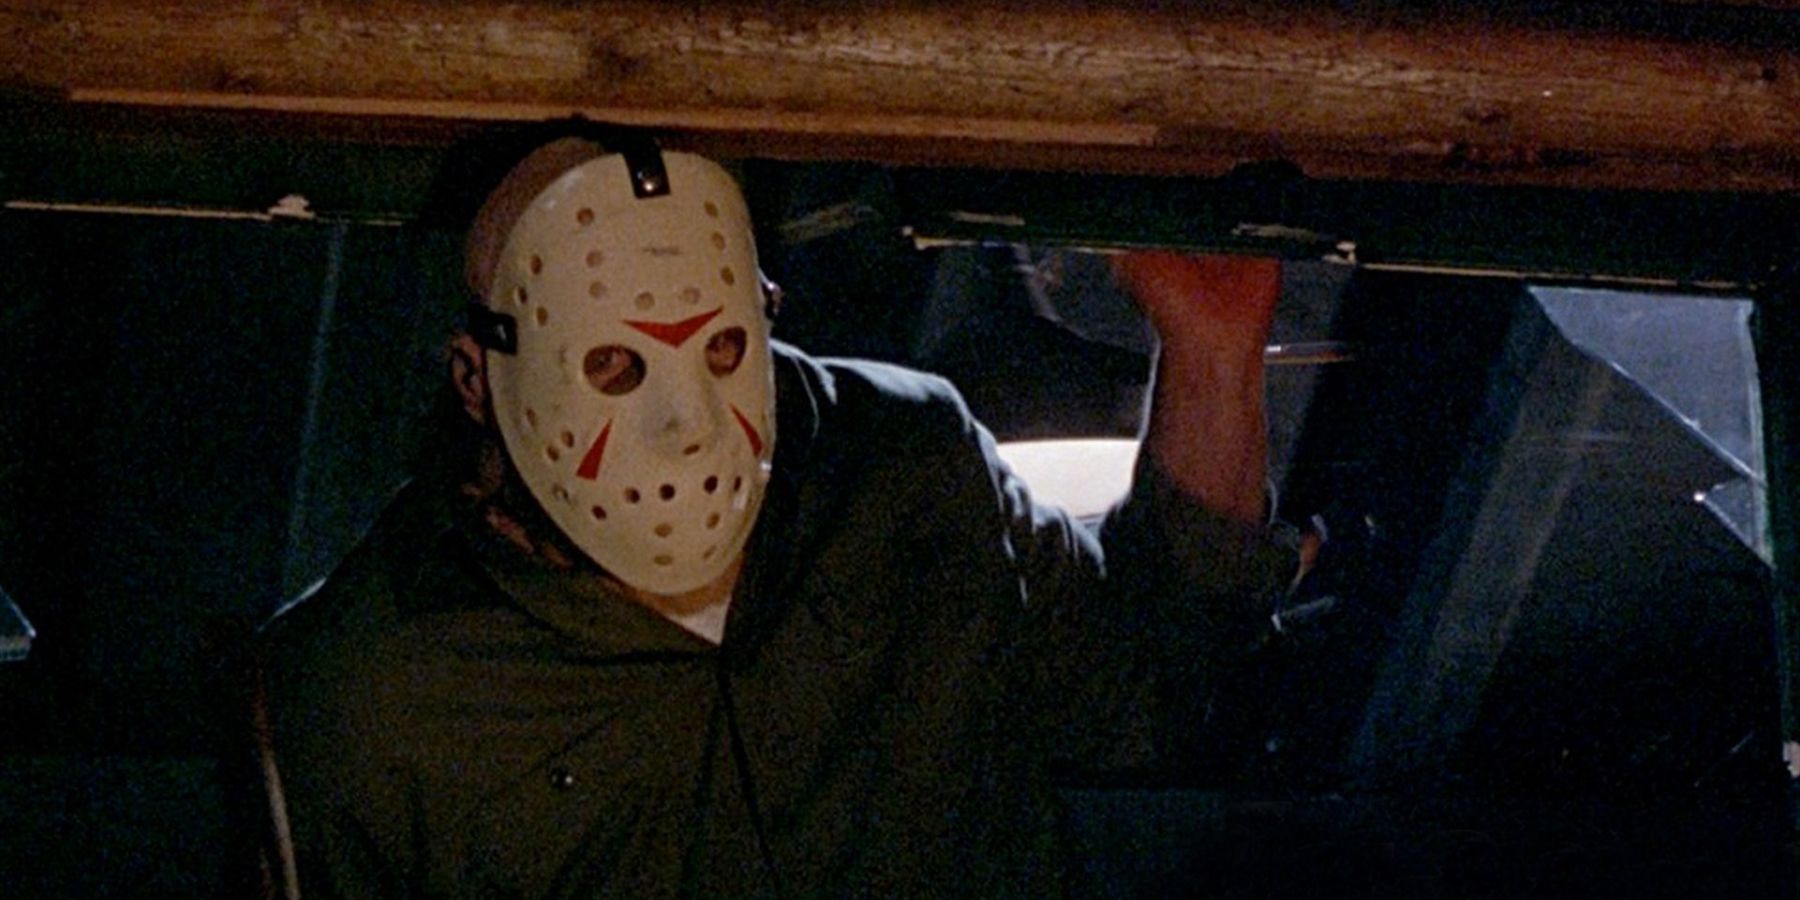 The 10 Best Friday The 13th Movies (According To Metacritic)